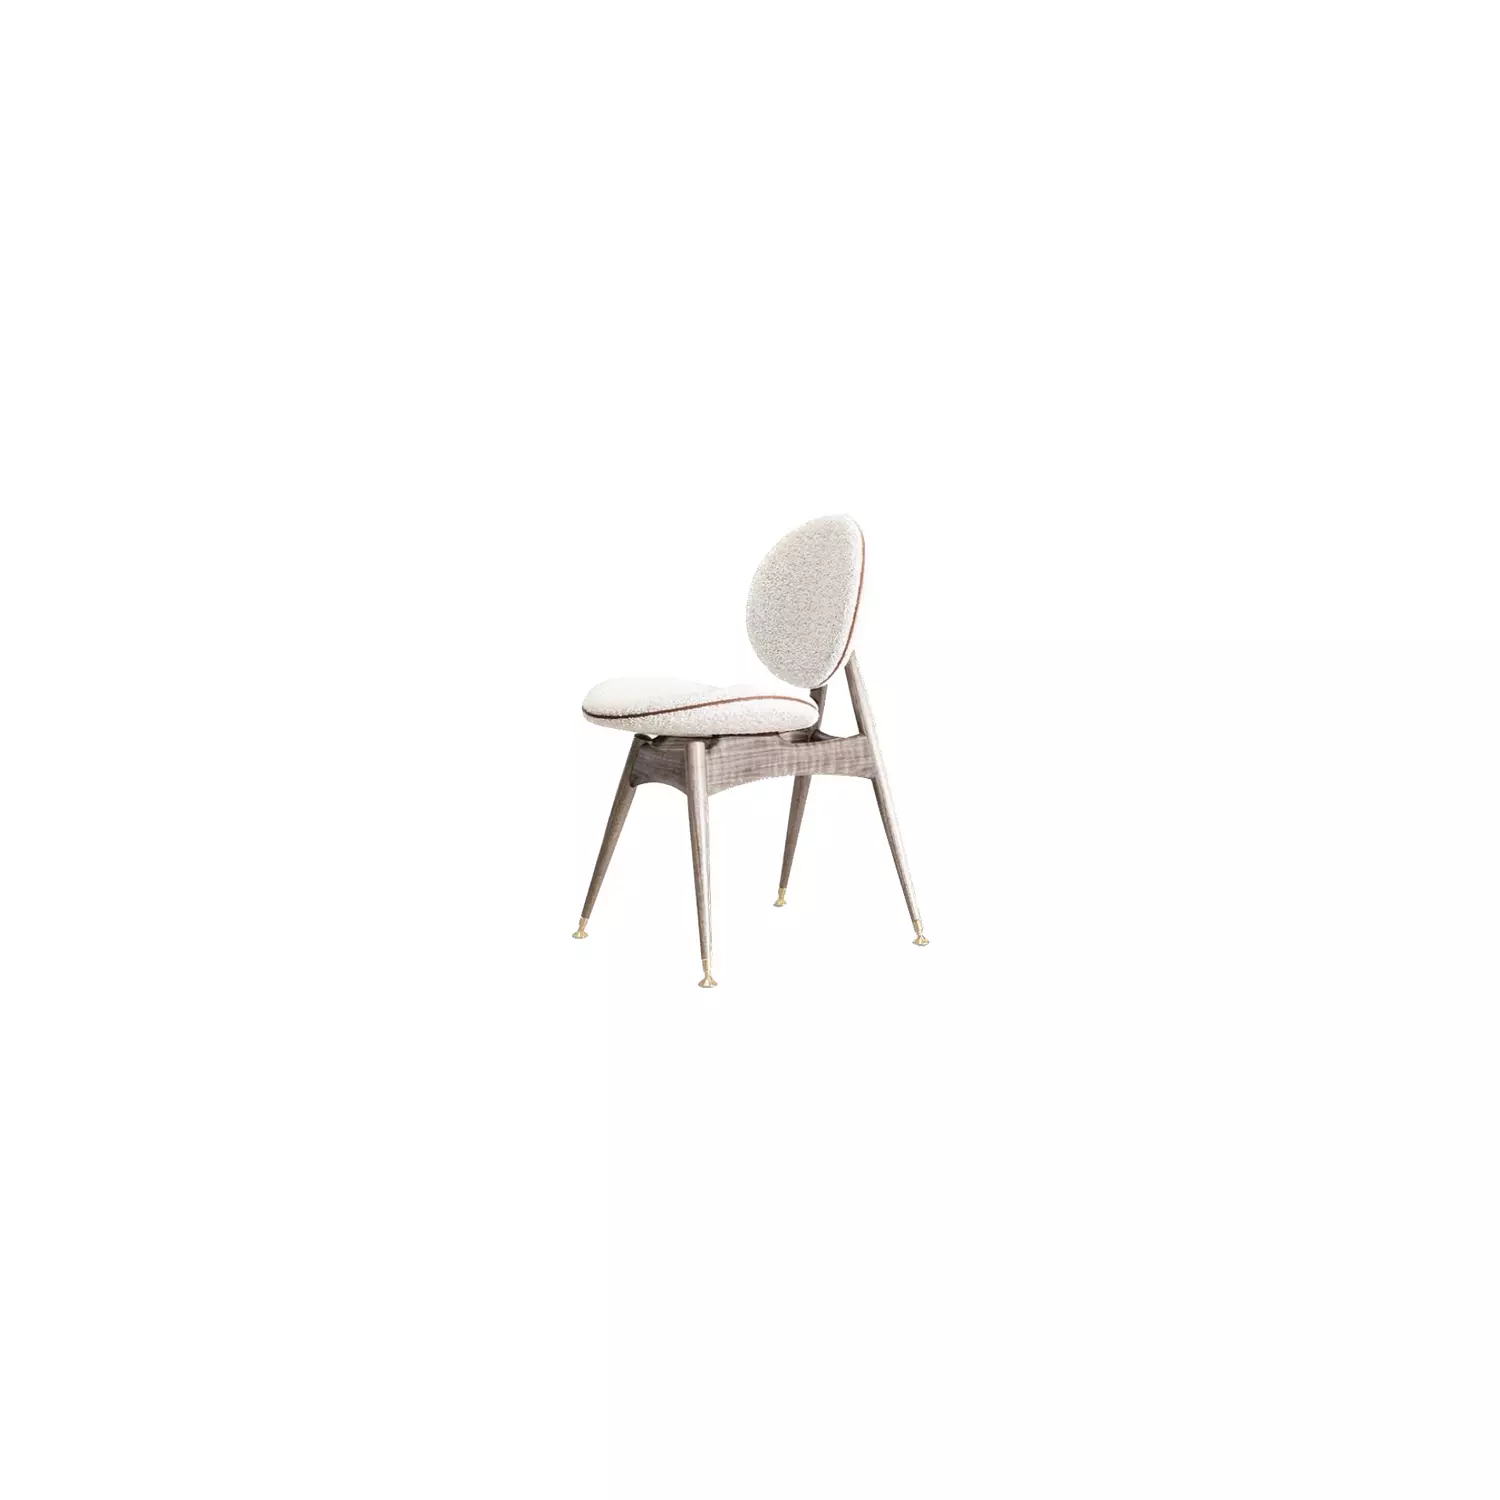 CIRCLE CHAIR hover image